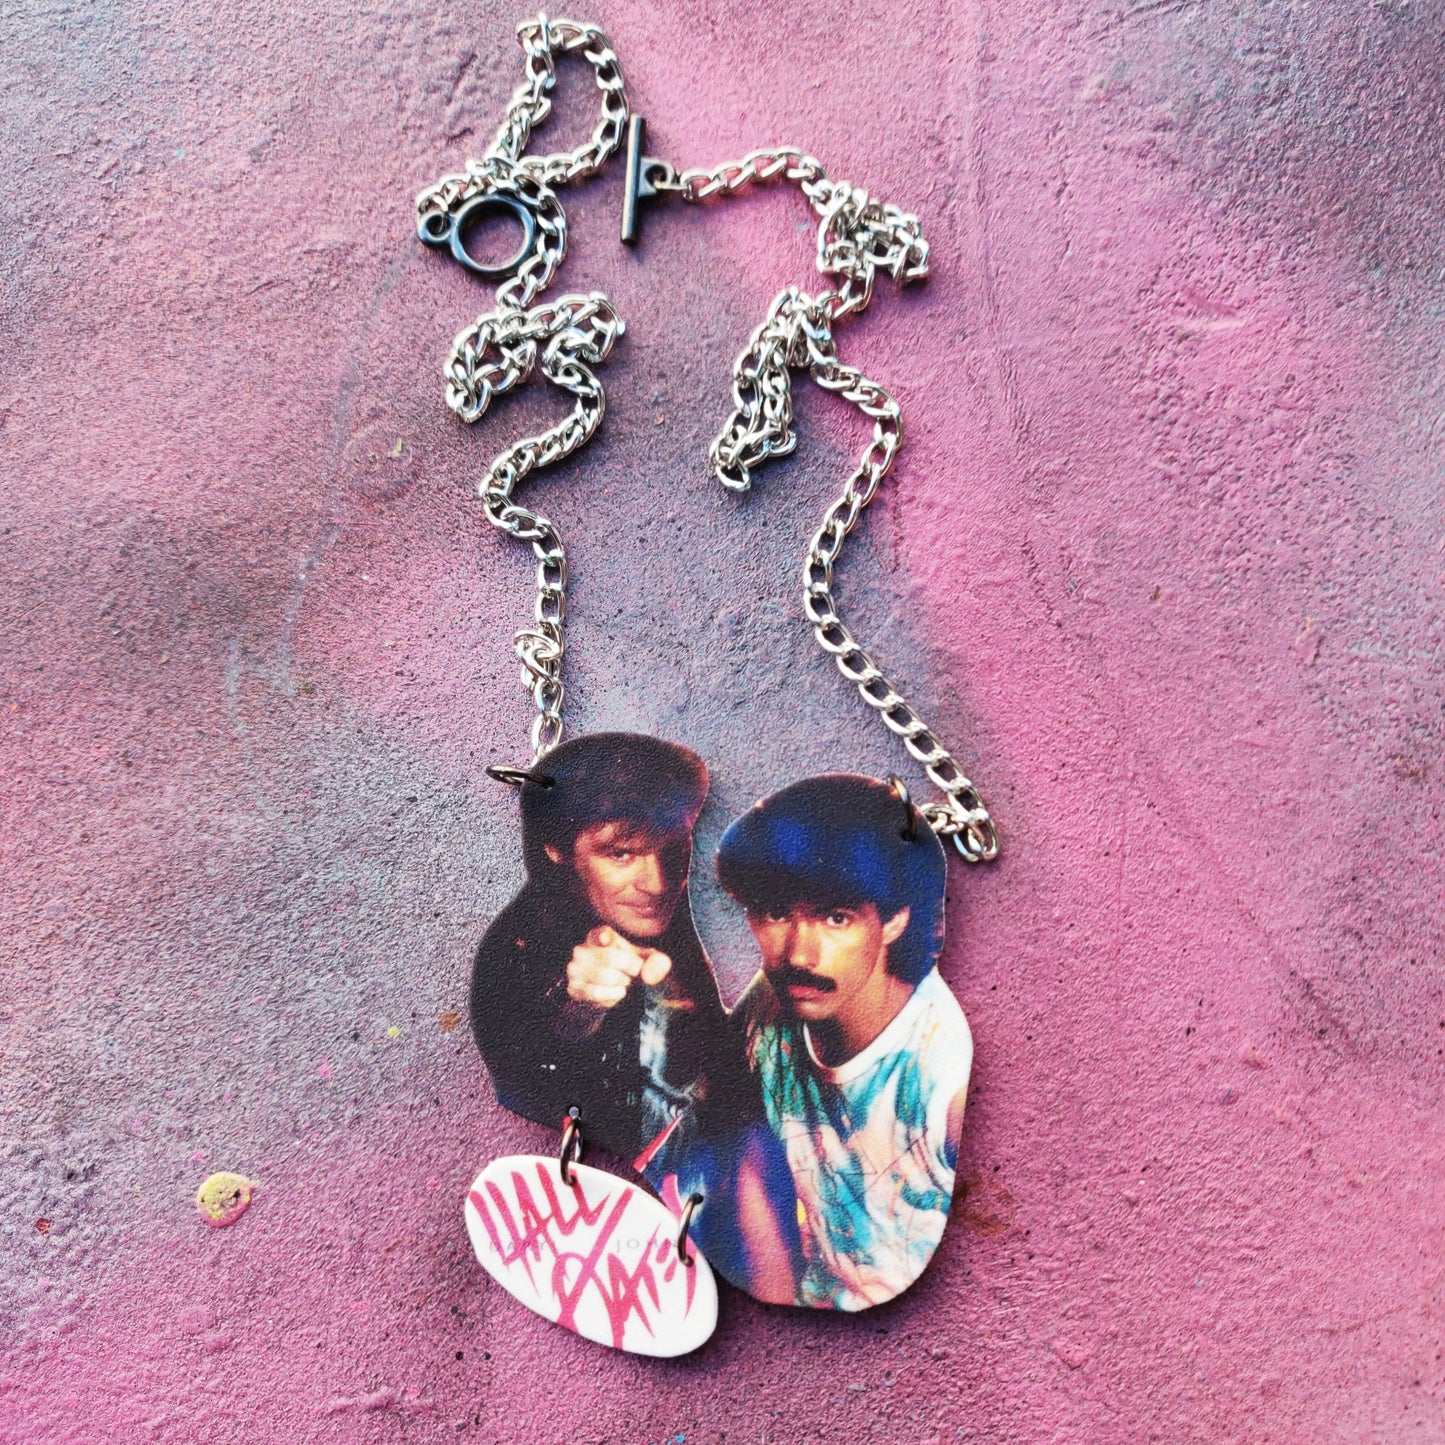 Hall & Oates necklace